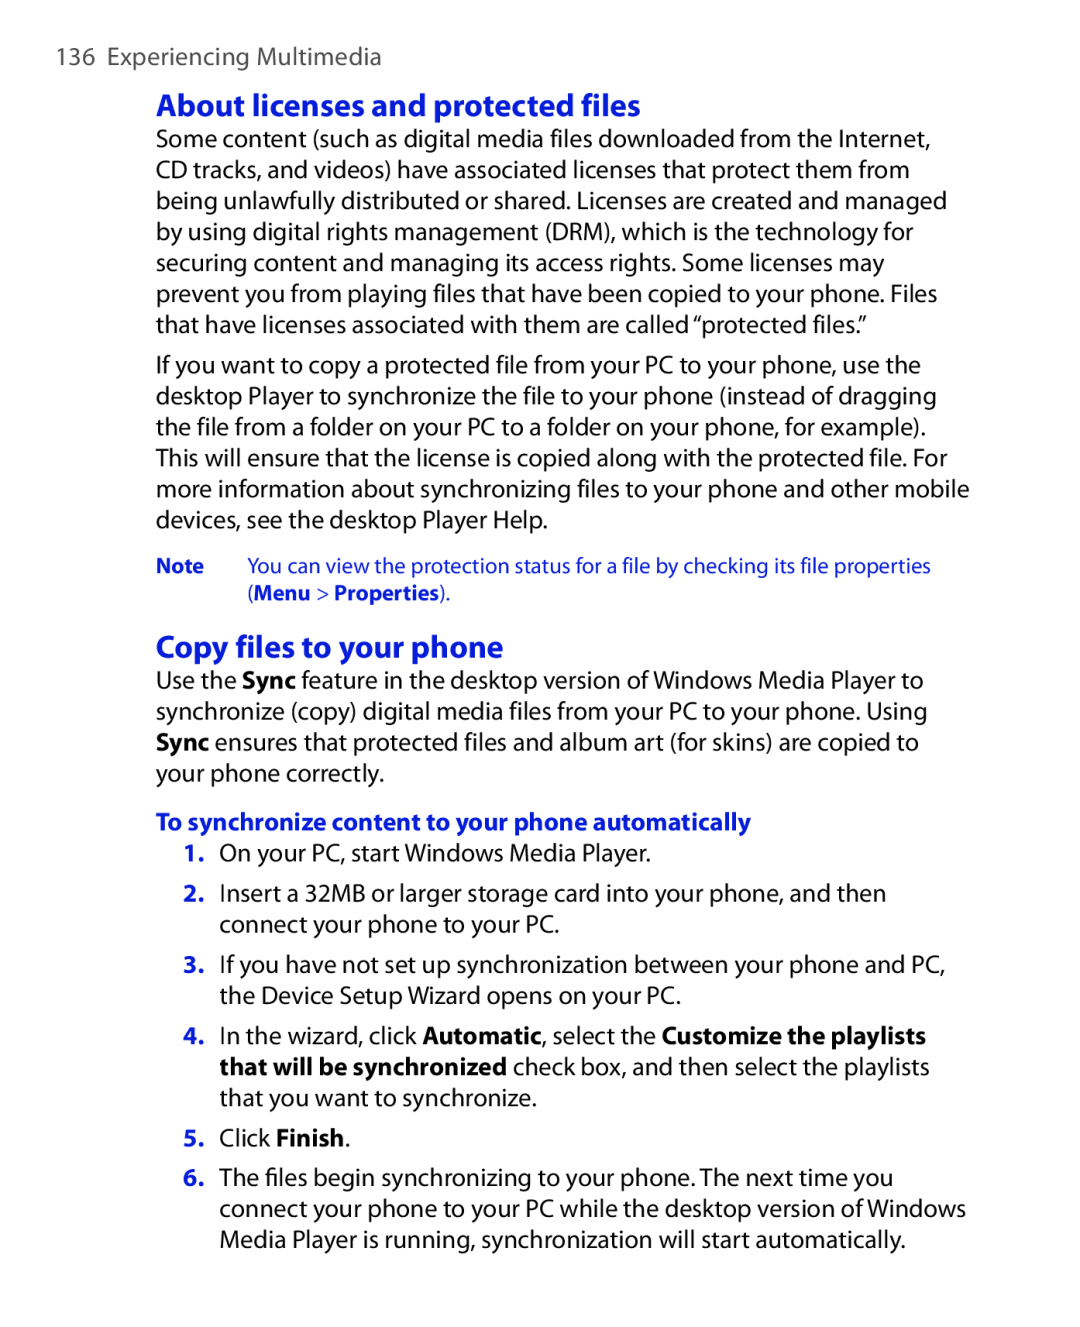 HTC HTC S621 user manual About licenses and protected files, Copy files to your phone, Experiencing Multimedia 